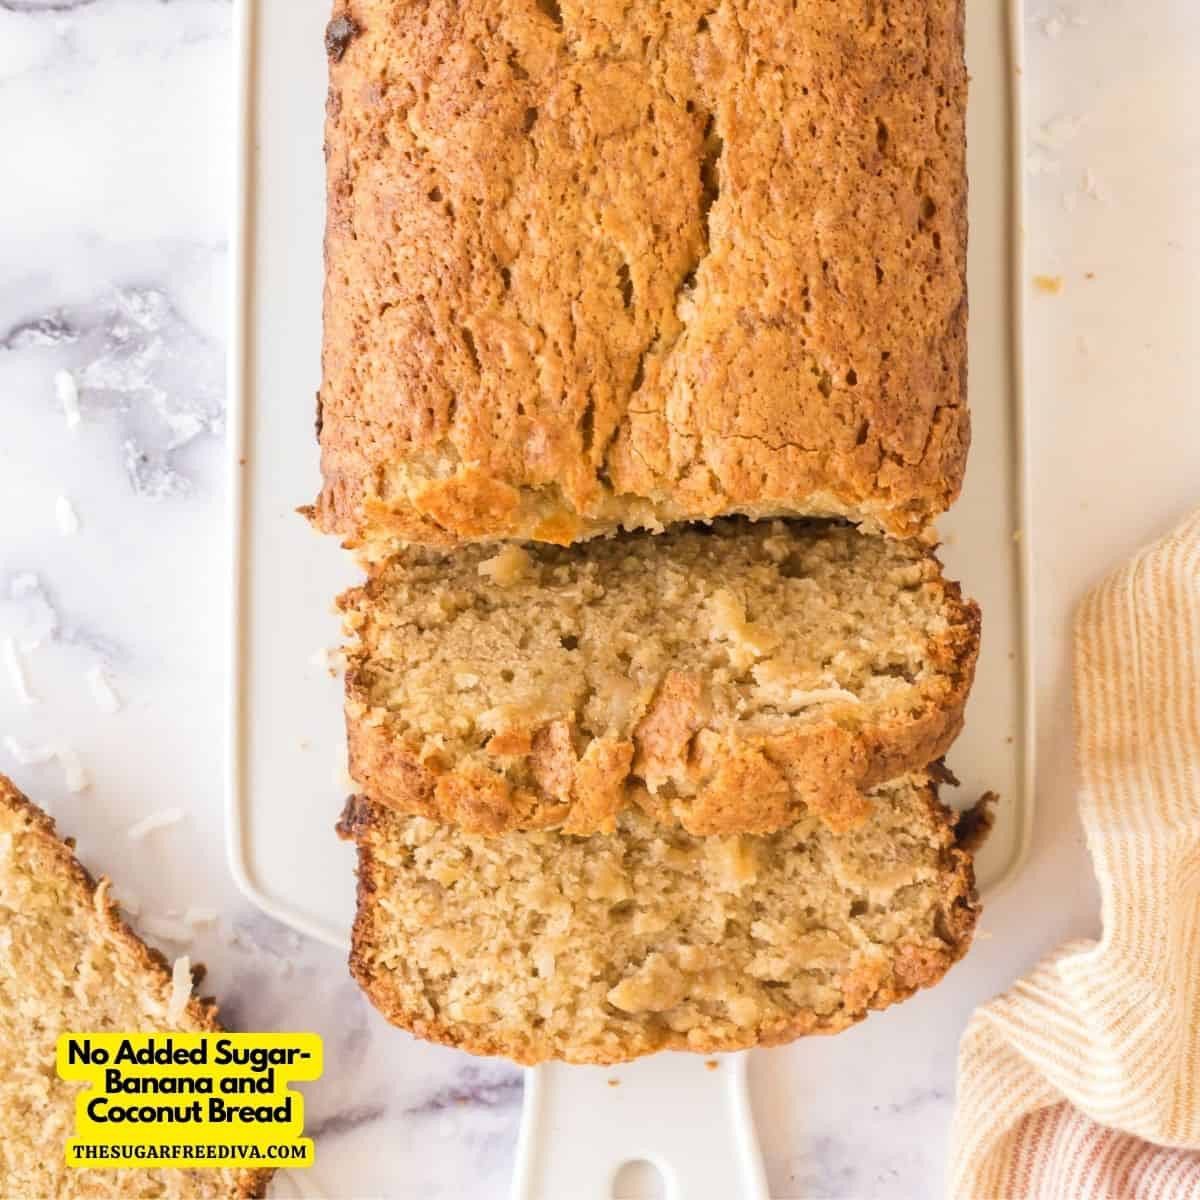 No Added Sugar- Banana and Coconut Bread, a simple and delicious recipe made with bananas and no added sugar. breakfast, brunch, or sandwich.